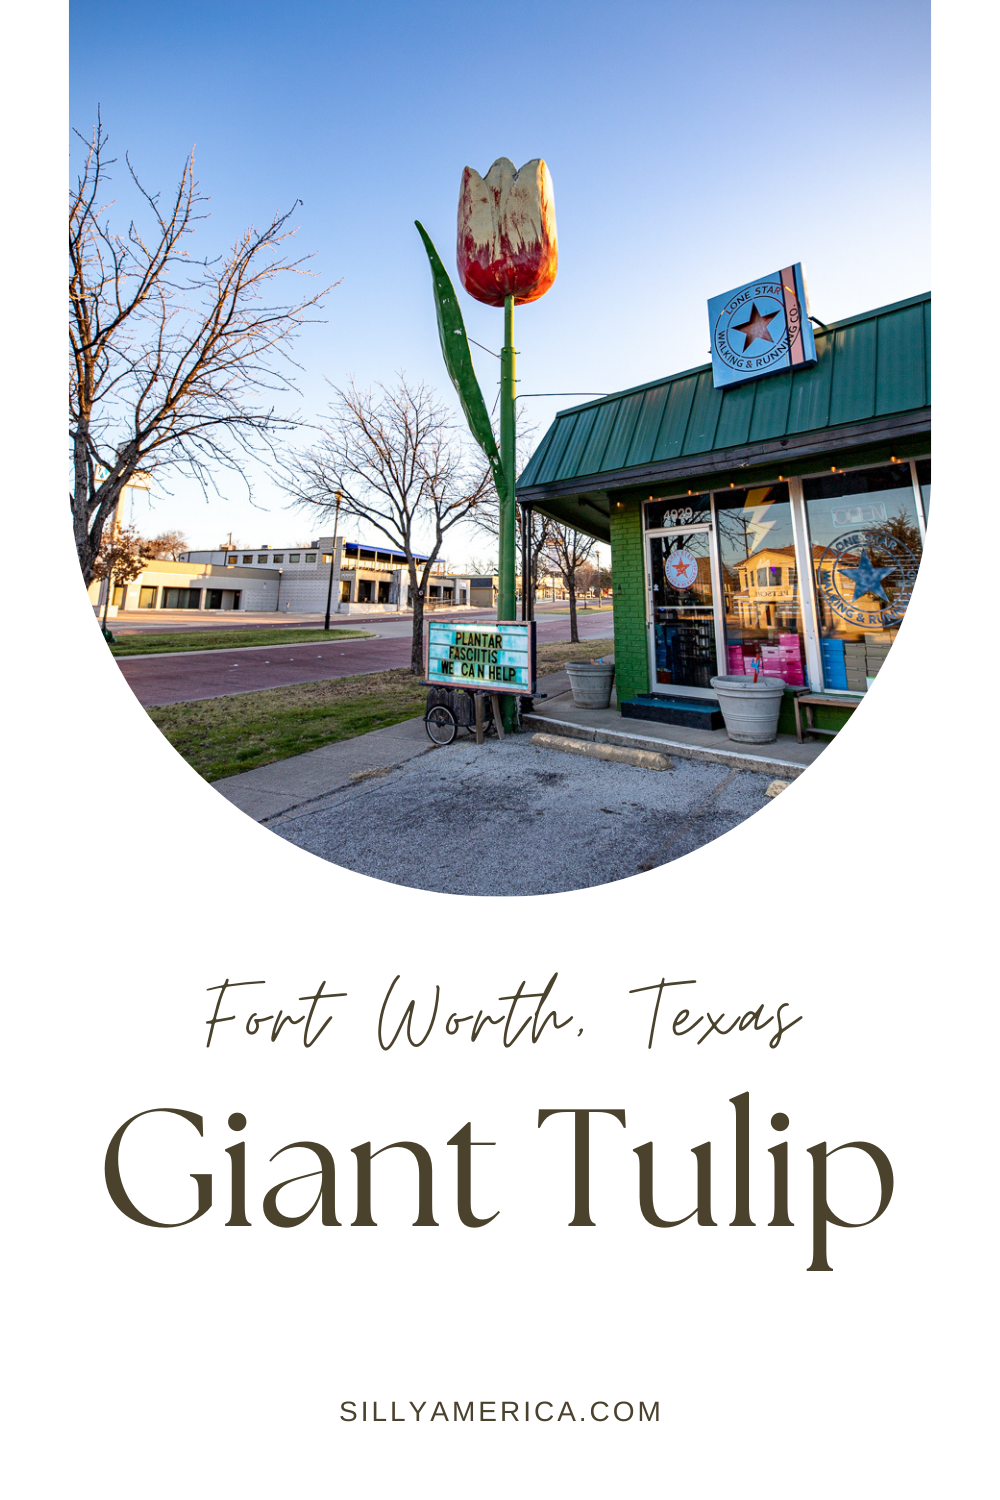 Visit the giant tulip roadside attraction Fort Worth, Texas on your next Texas road trip. Add this fun and weird roadside attraction to your travel itinerary. The 20-foot tall big flower can be found at the athletic store, Lone Star Walking & Running Co. in Fort Worth. #RoadTrip #TexasRoadTrip #Texas #FortWorth #FortWorthRoadTrip #RoadsideAttraction #RoadsideAttractions #TexasRoadsideAttraction #RoadsideAmerica